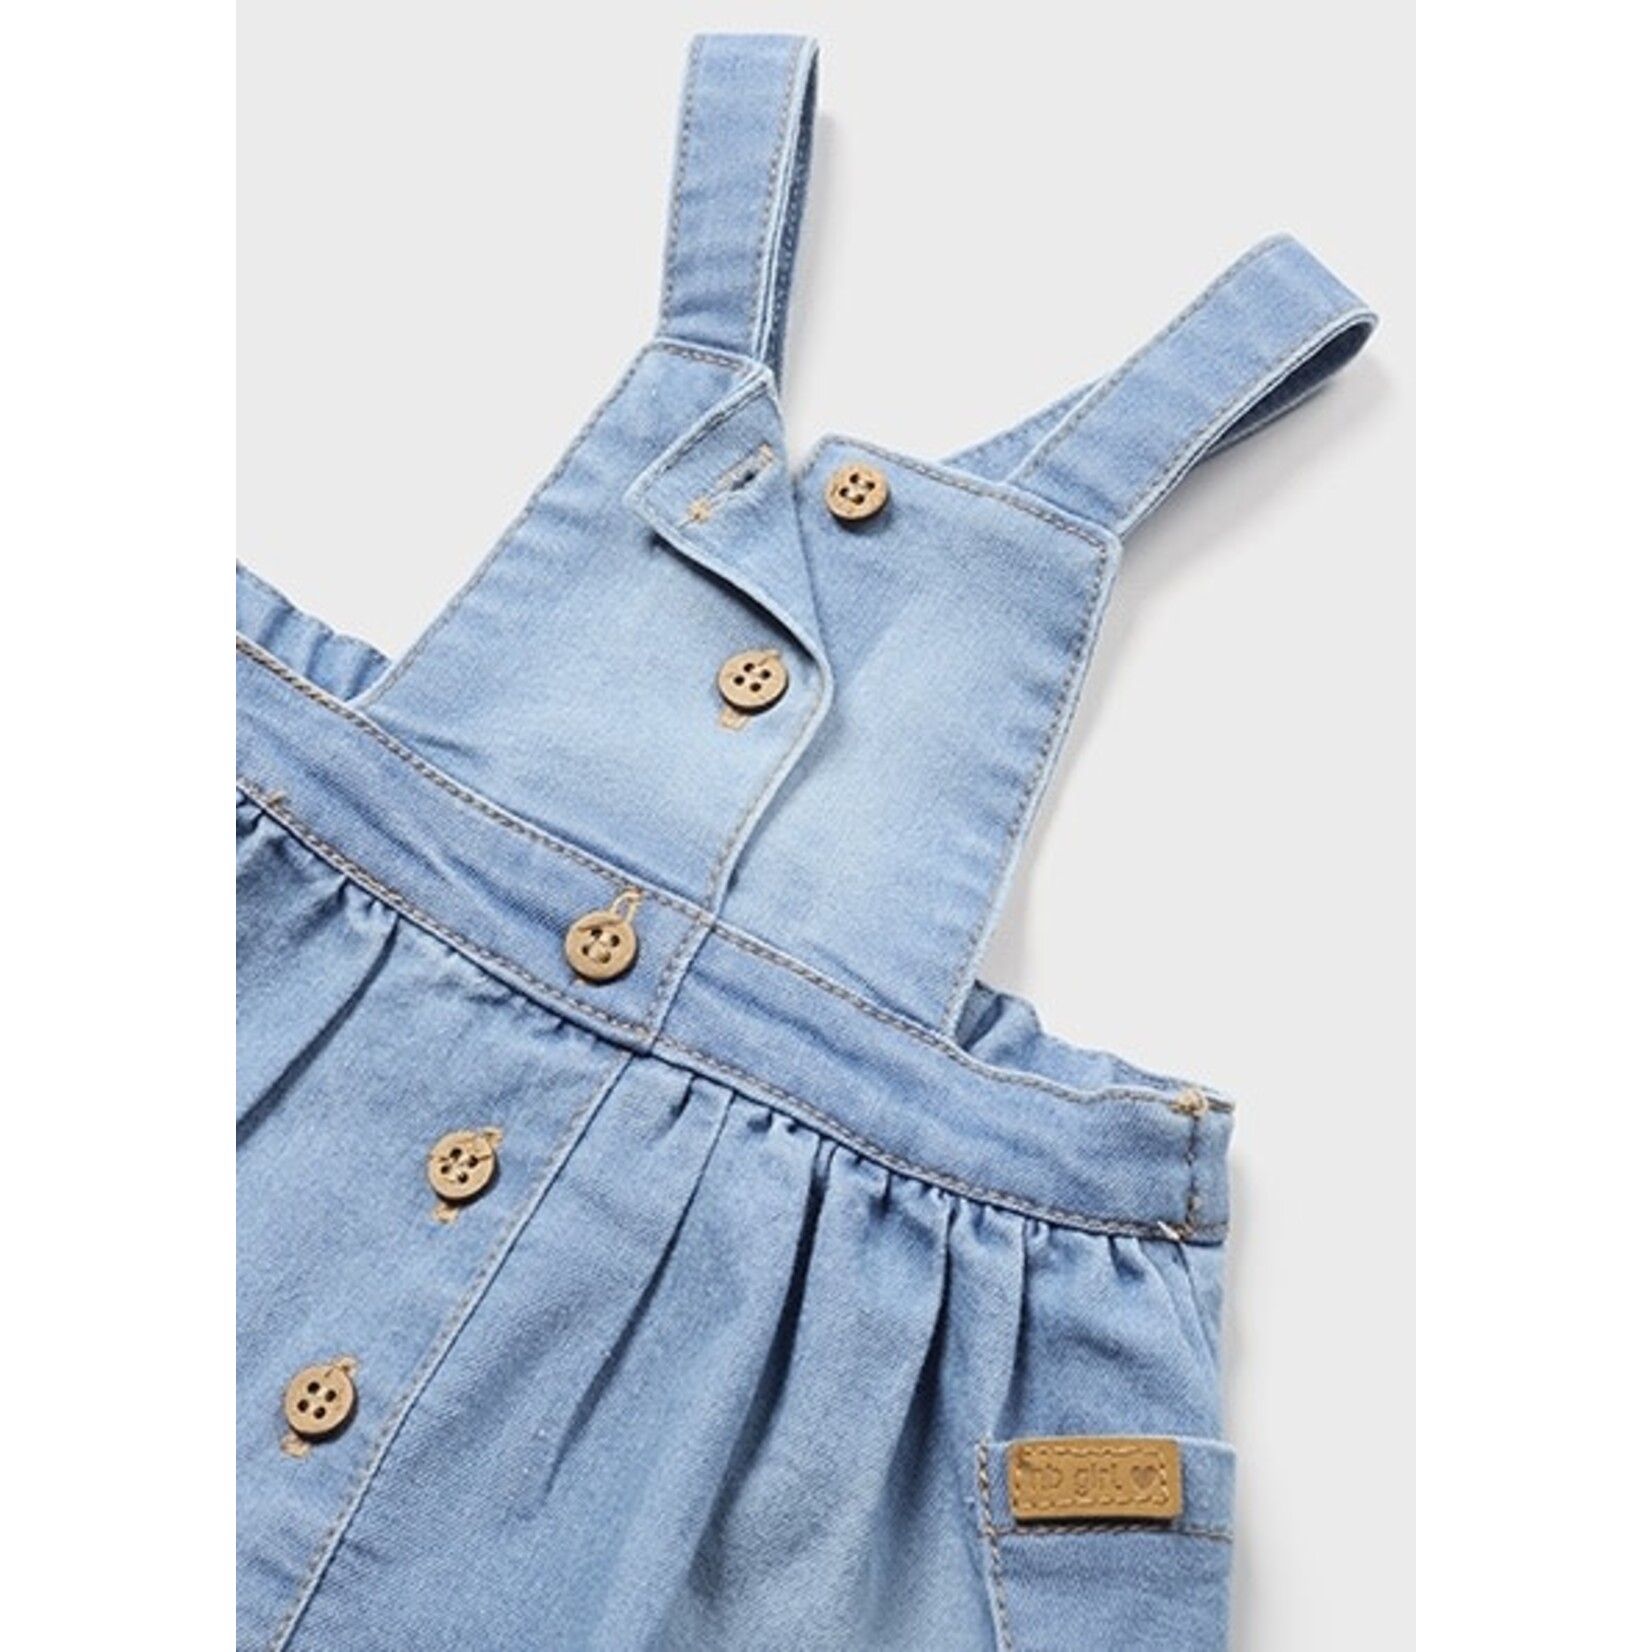 Chumhey 0-8Y Kids Overalls Baby Boys Girls Bib Suspender Jeans Soft  Stretchy Denim Trousers Children Clothing Clothes Spring